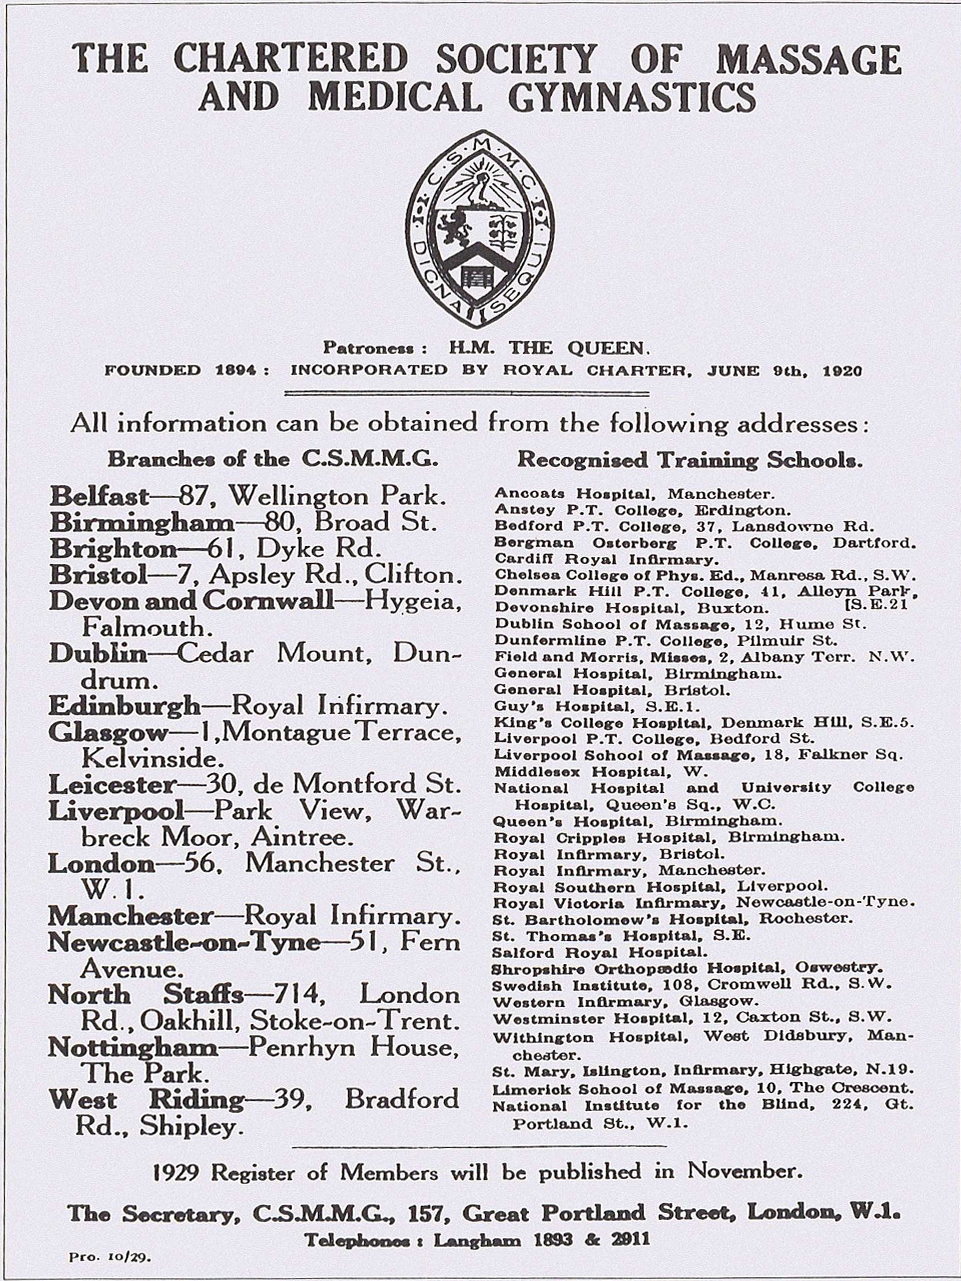 Advertisement page headed 'The Chartered Society of Massage and Medical Gymnastics, Patroness: H.M. The Queen' featuring a crest and a list of names of branches and recognised training schools.